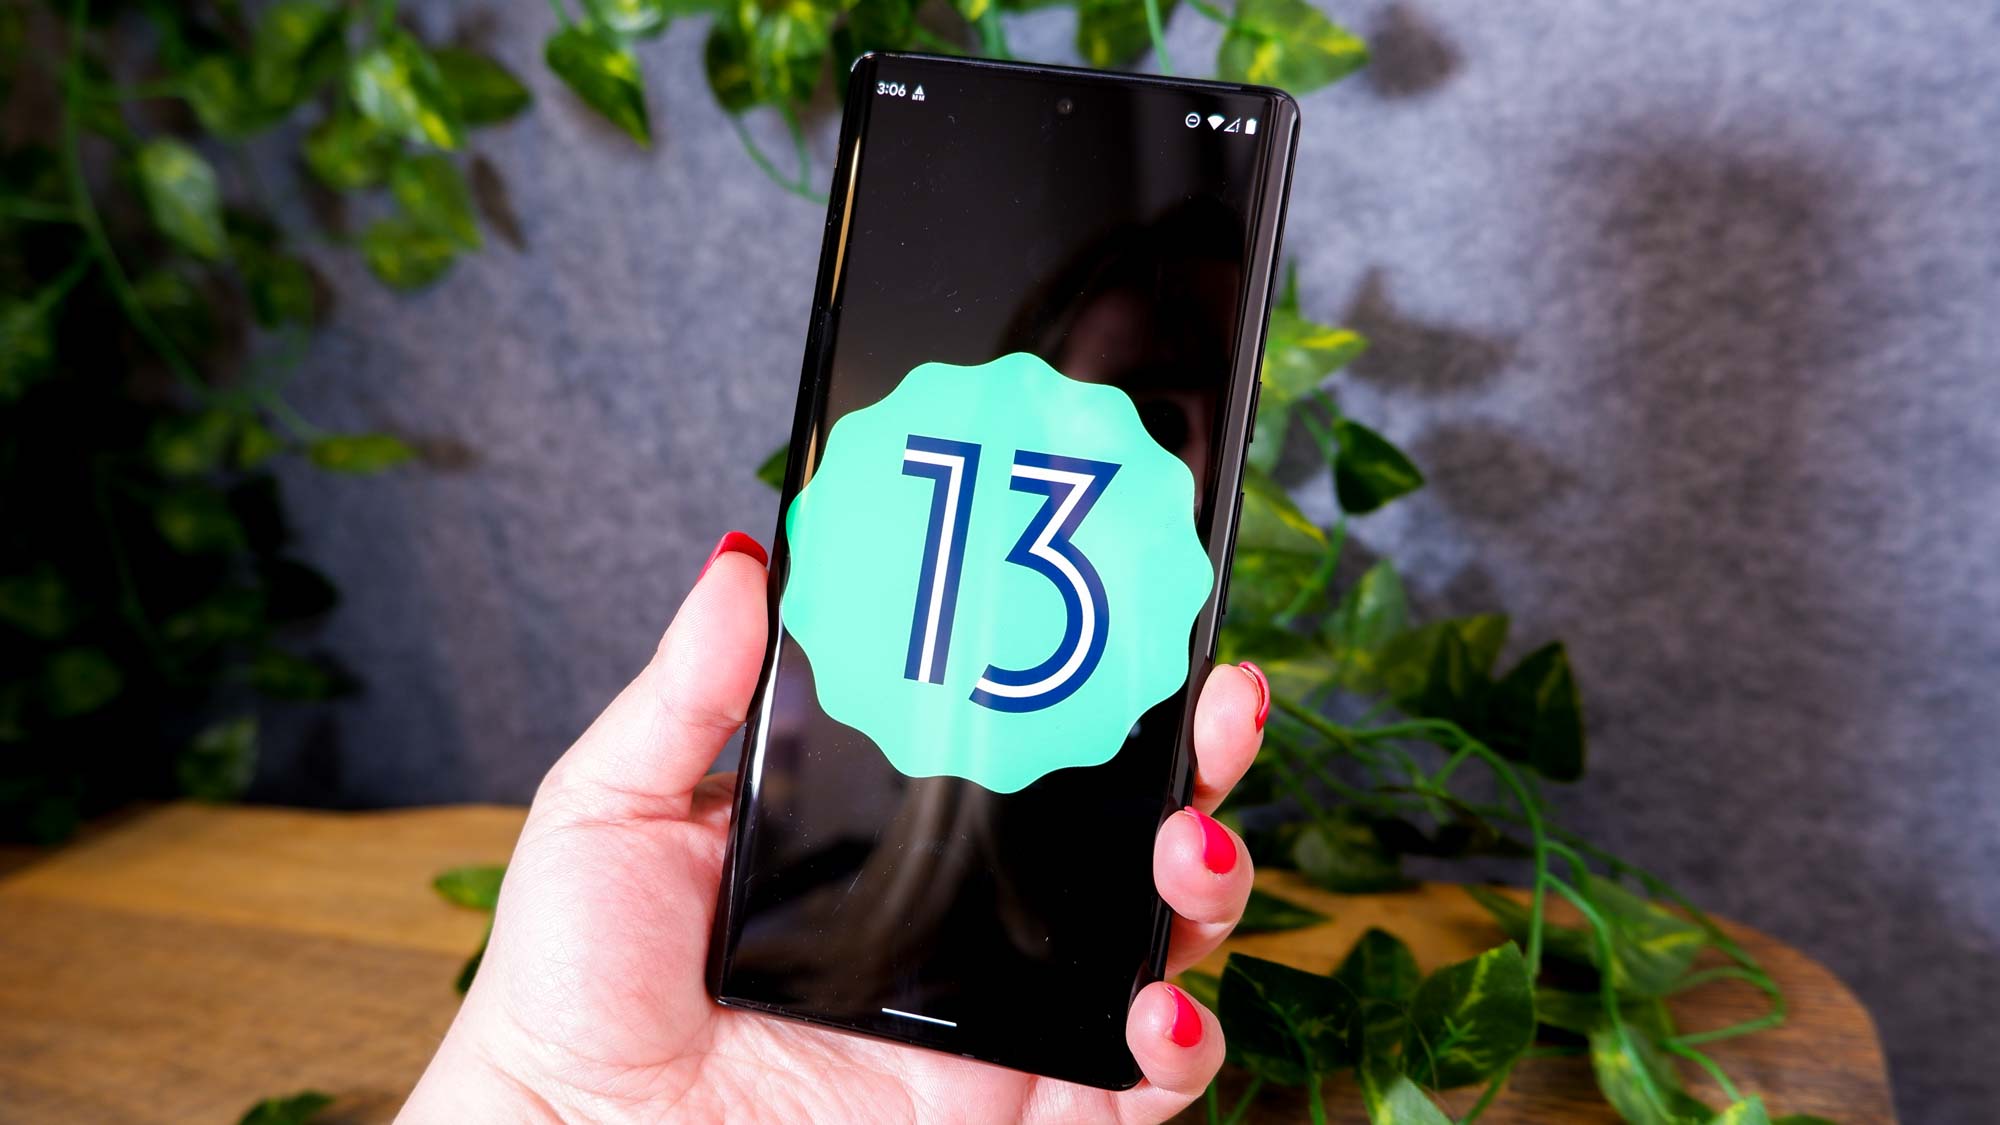 Android 13 logo on a smartphone